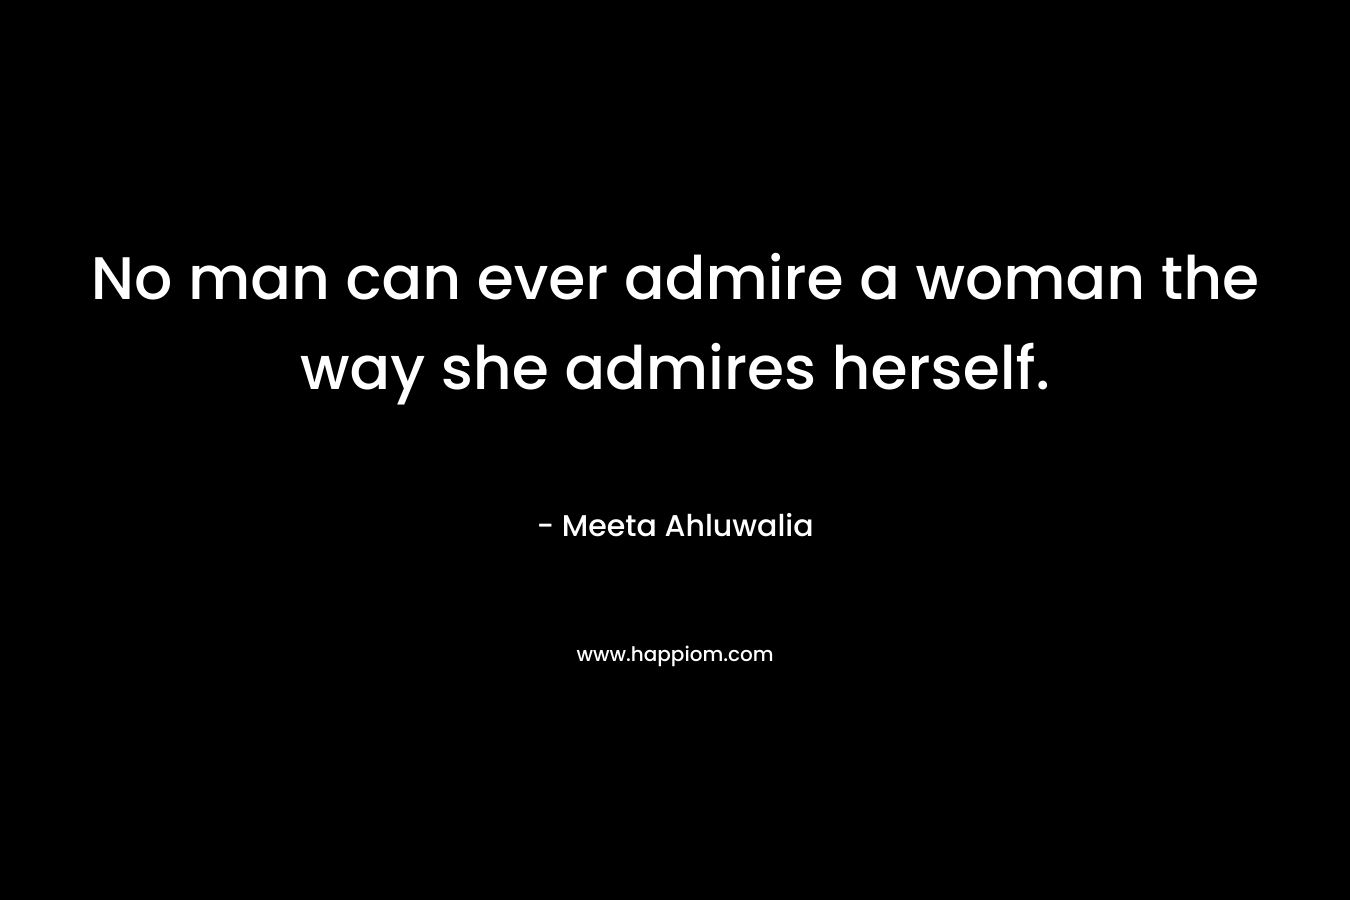 No man can ever admire a woman the way she admires herself.